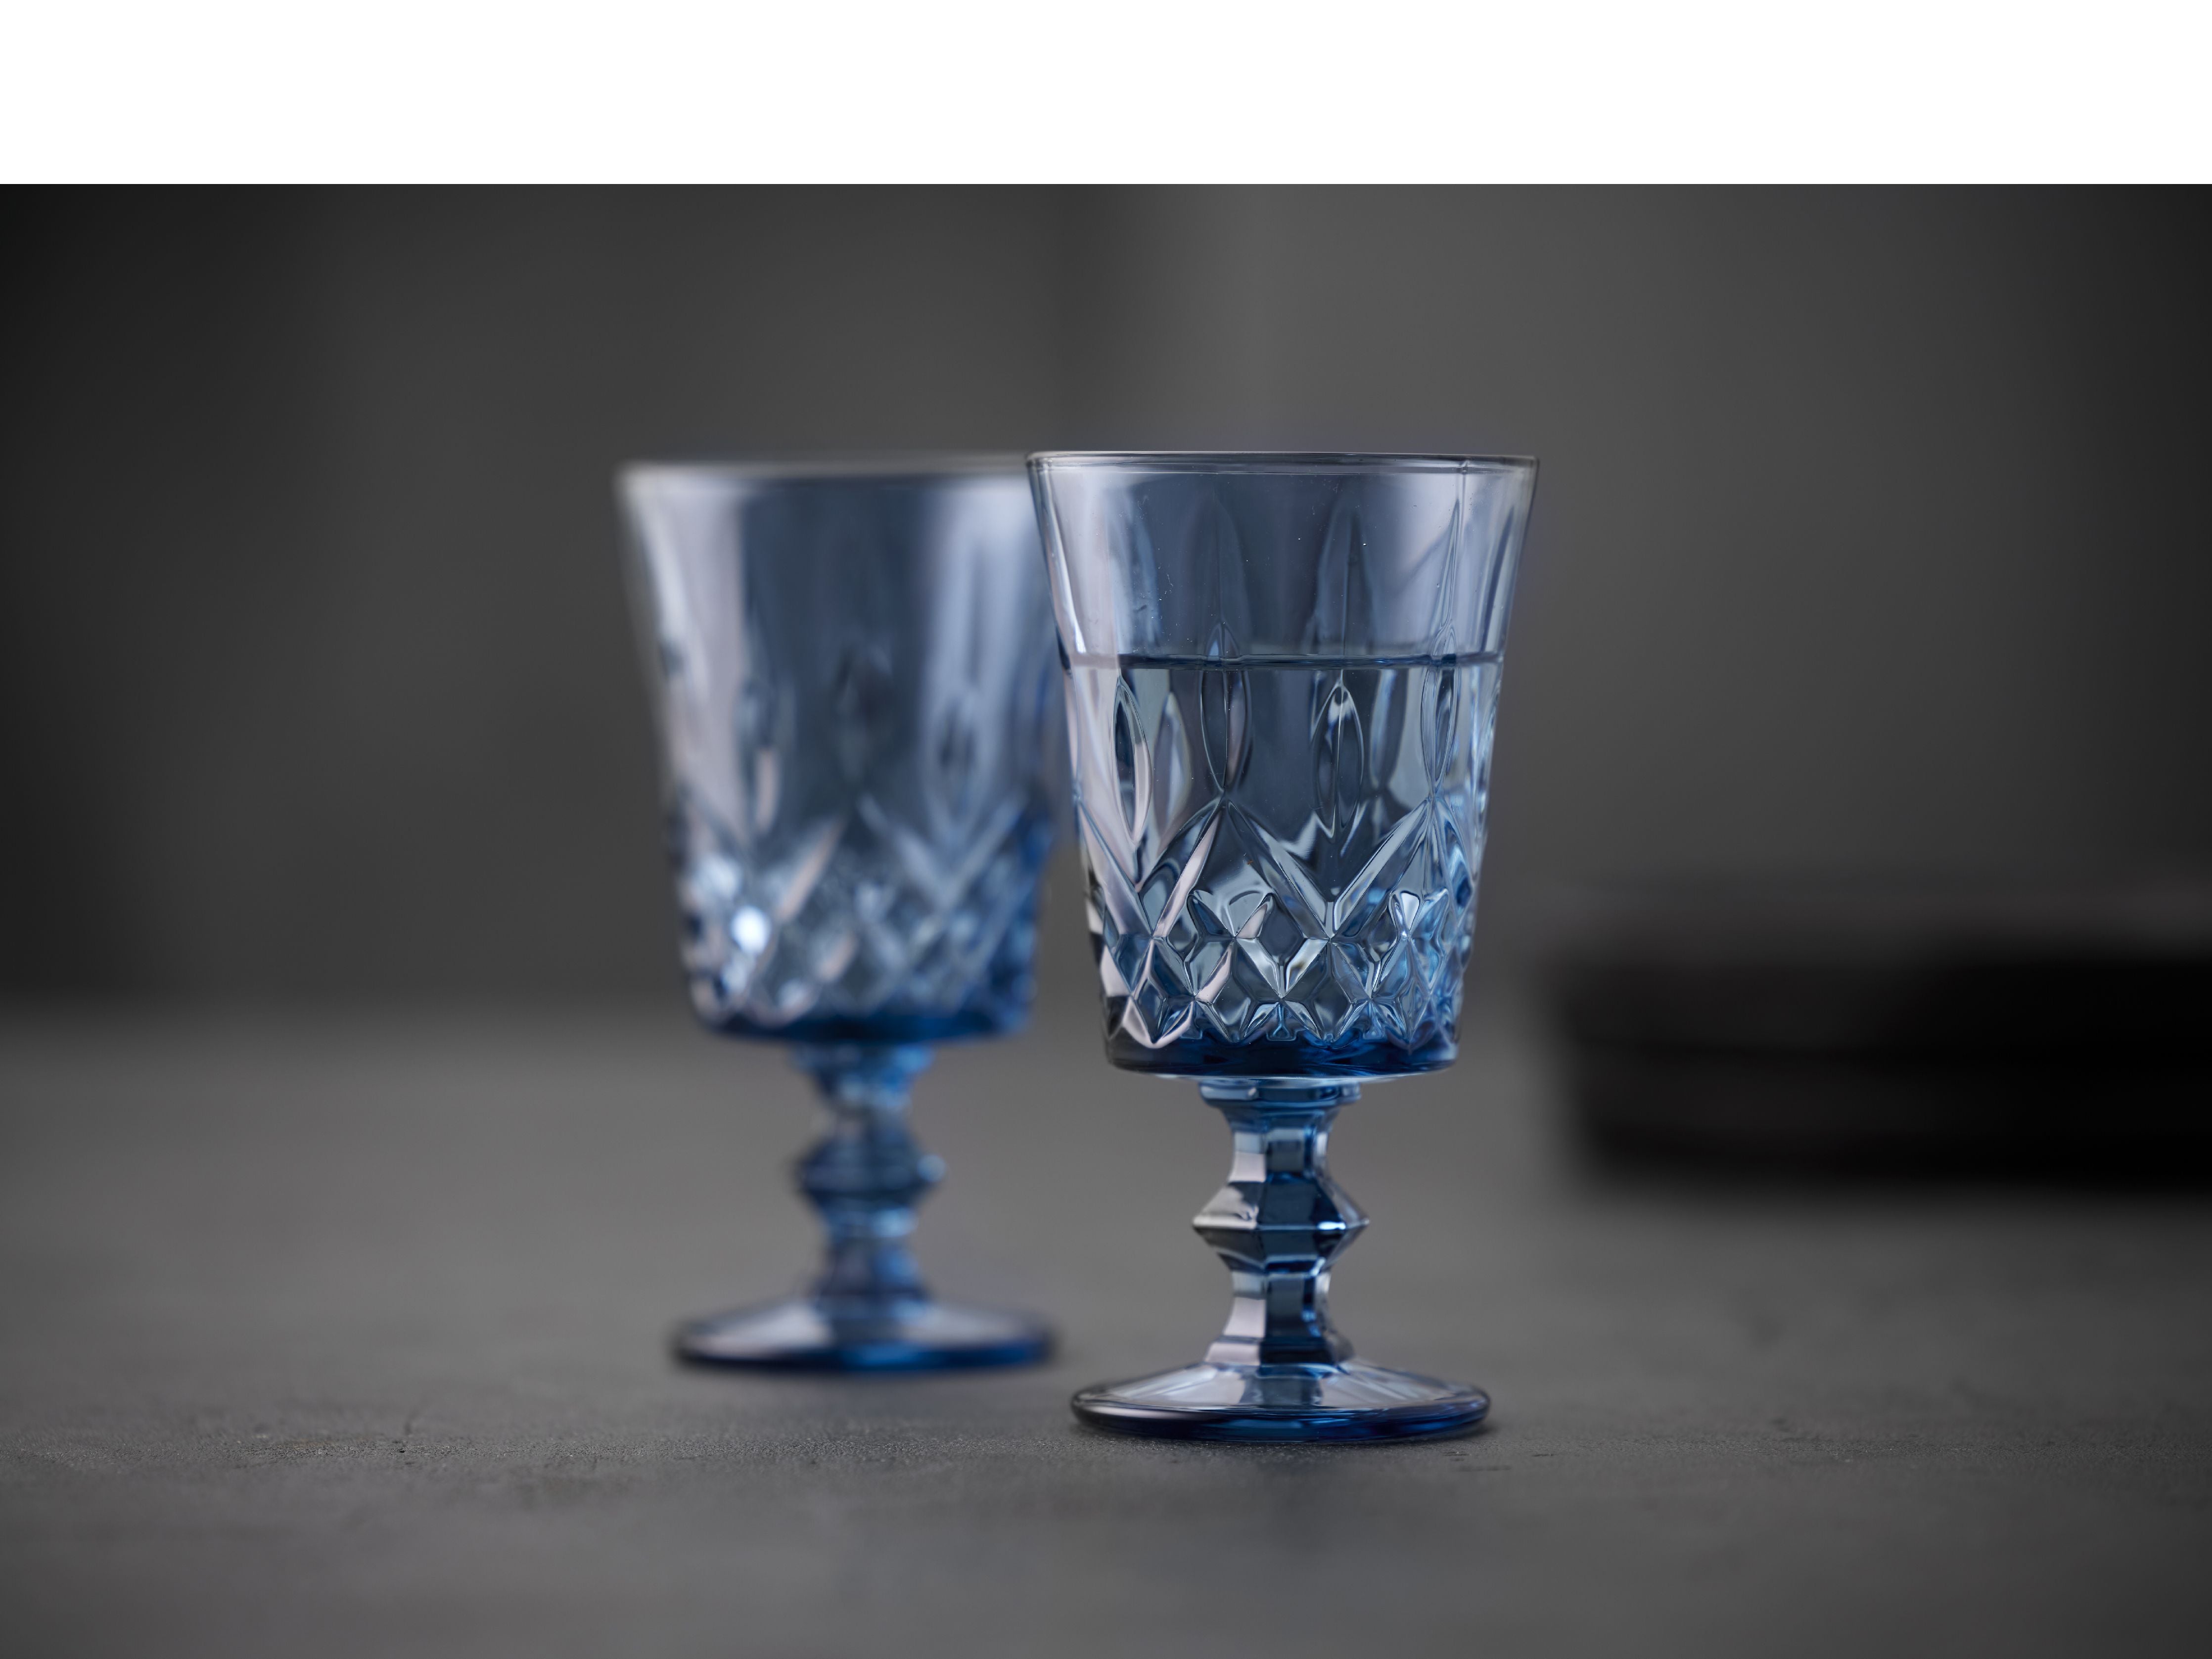 Lyngby Glas Sorrento酒杯29 Cl 4 PC。，蓝色